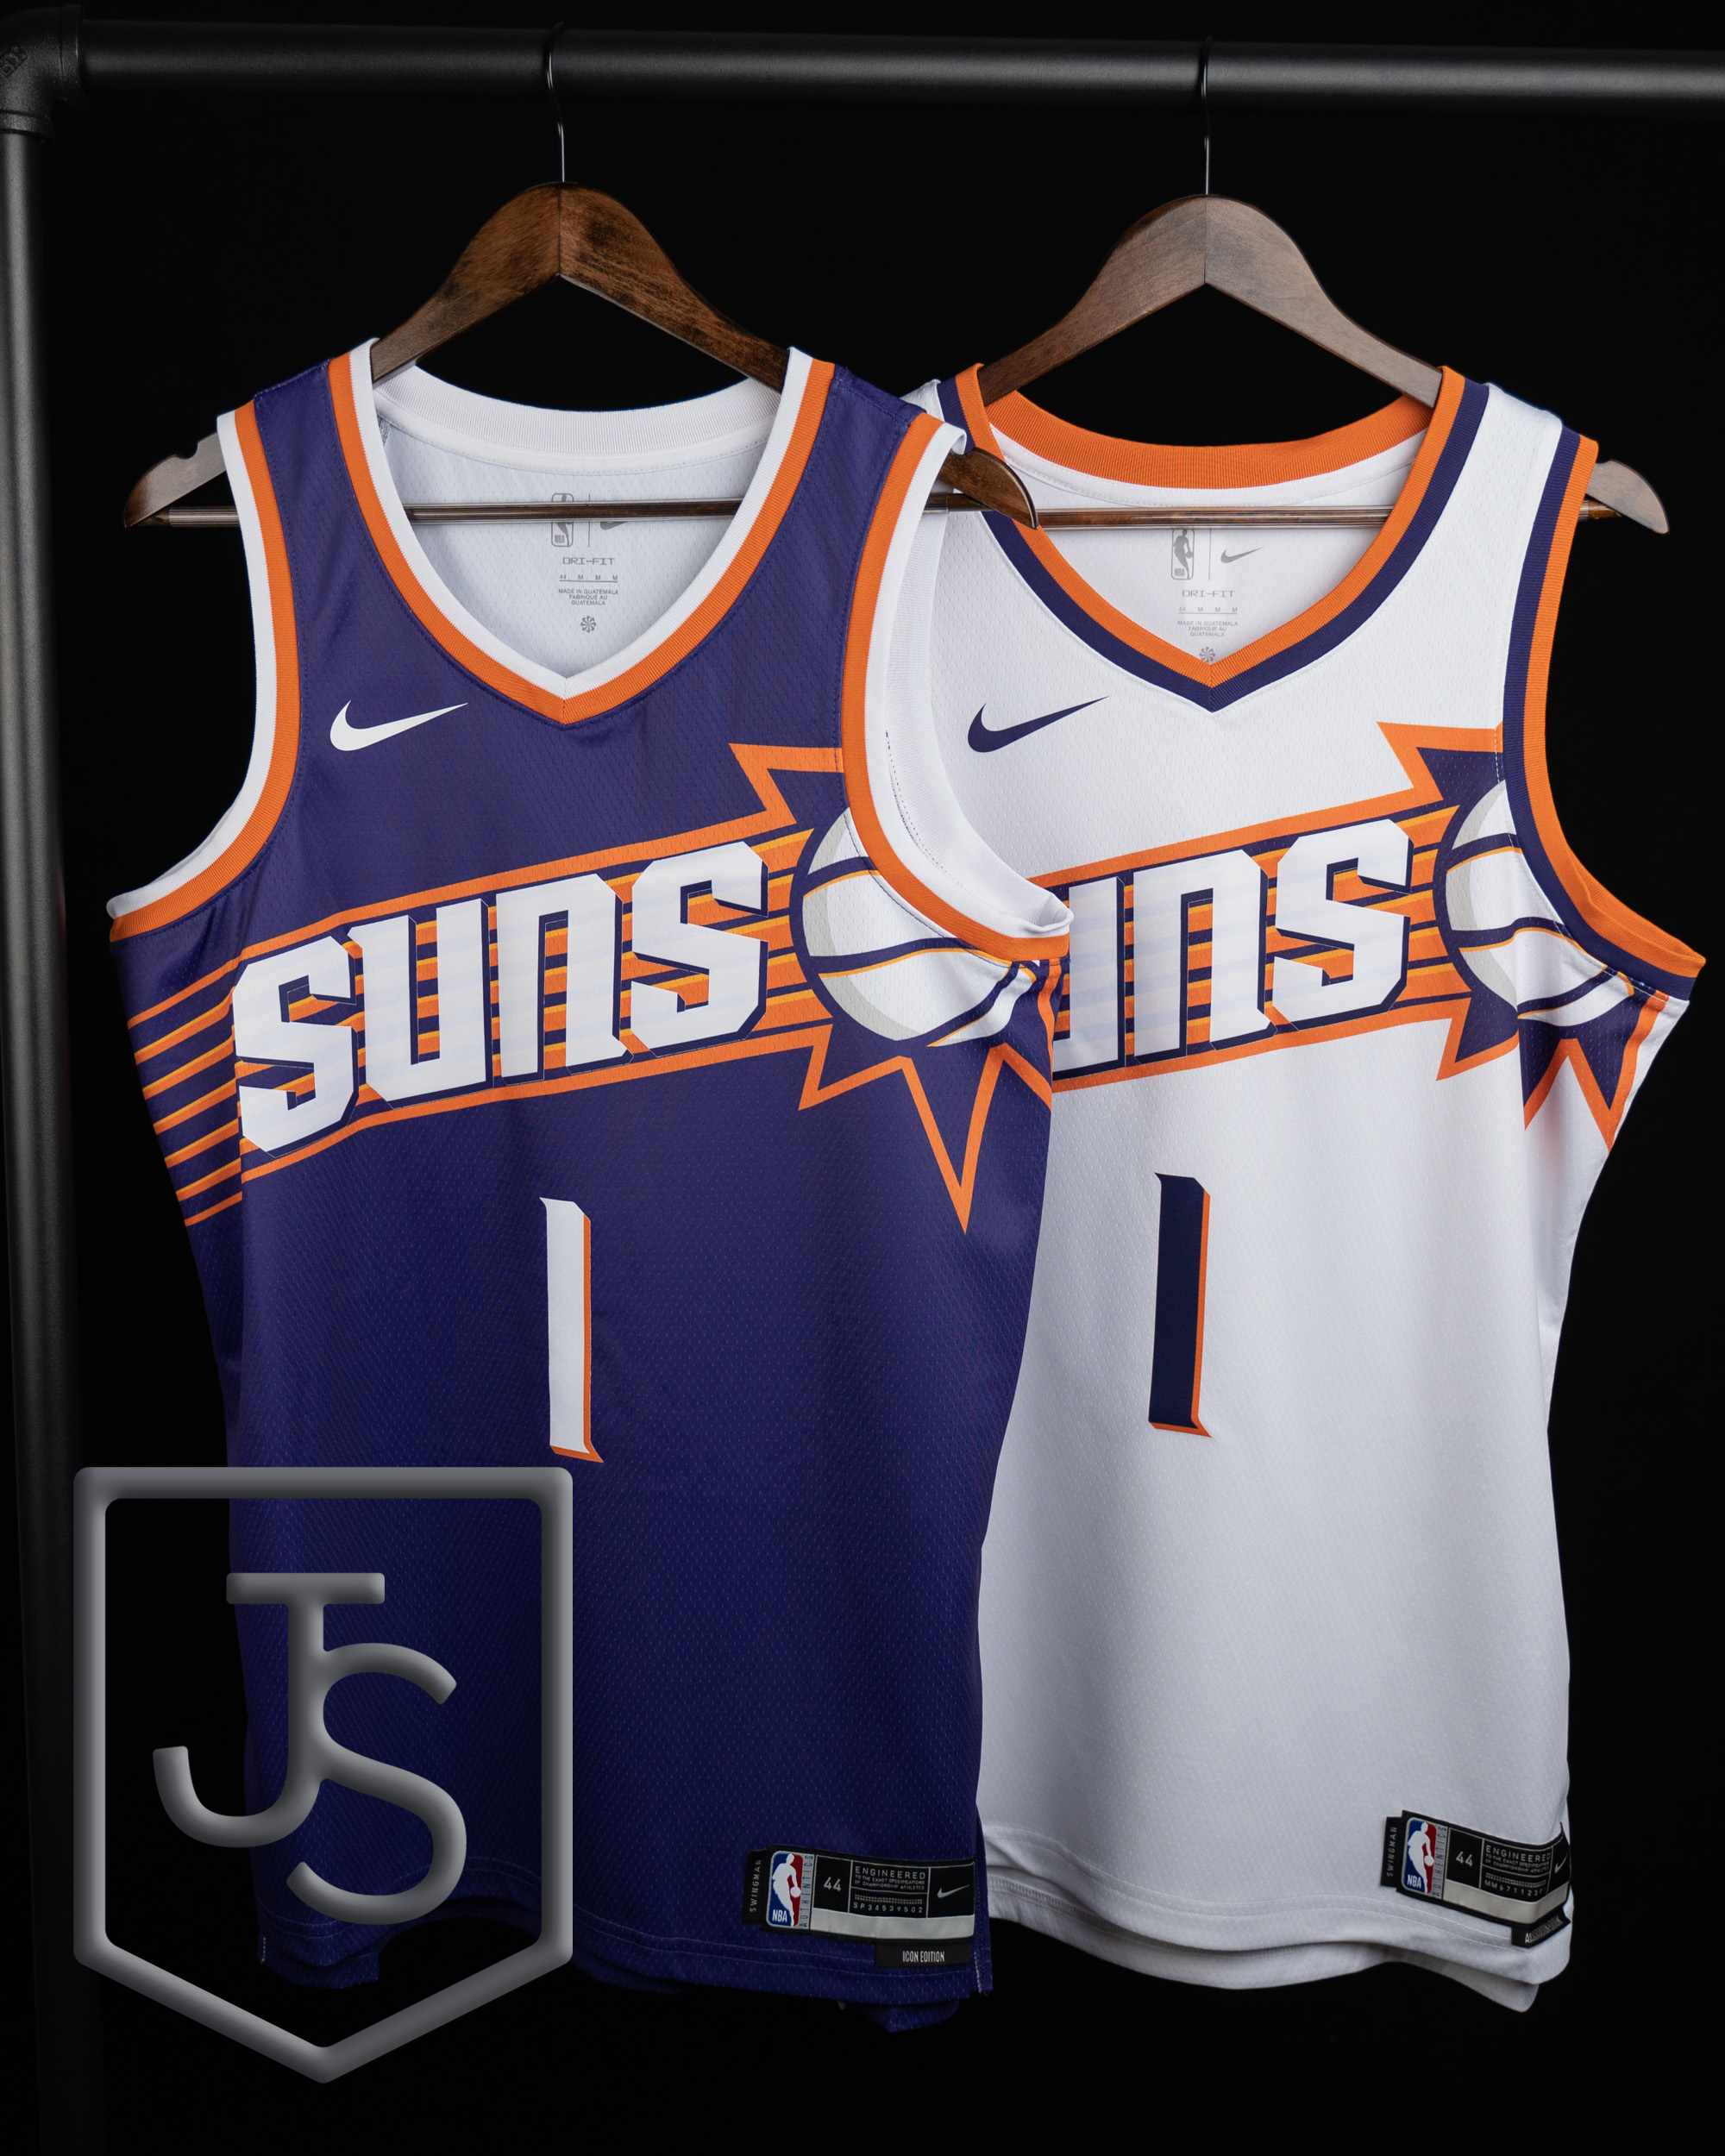 Are these the new Phoenix Suns jerseys? 